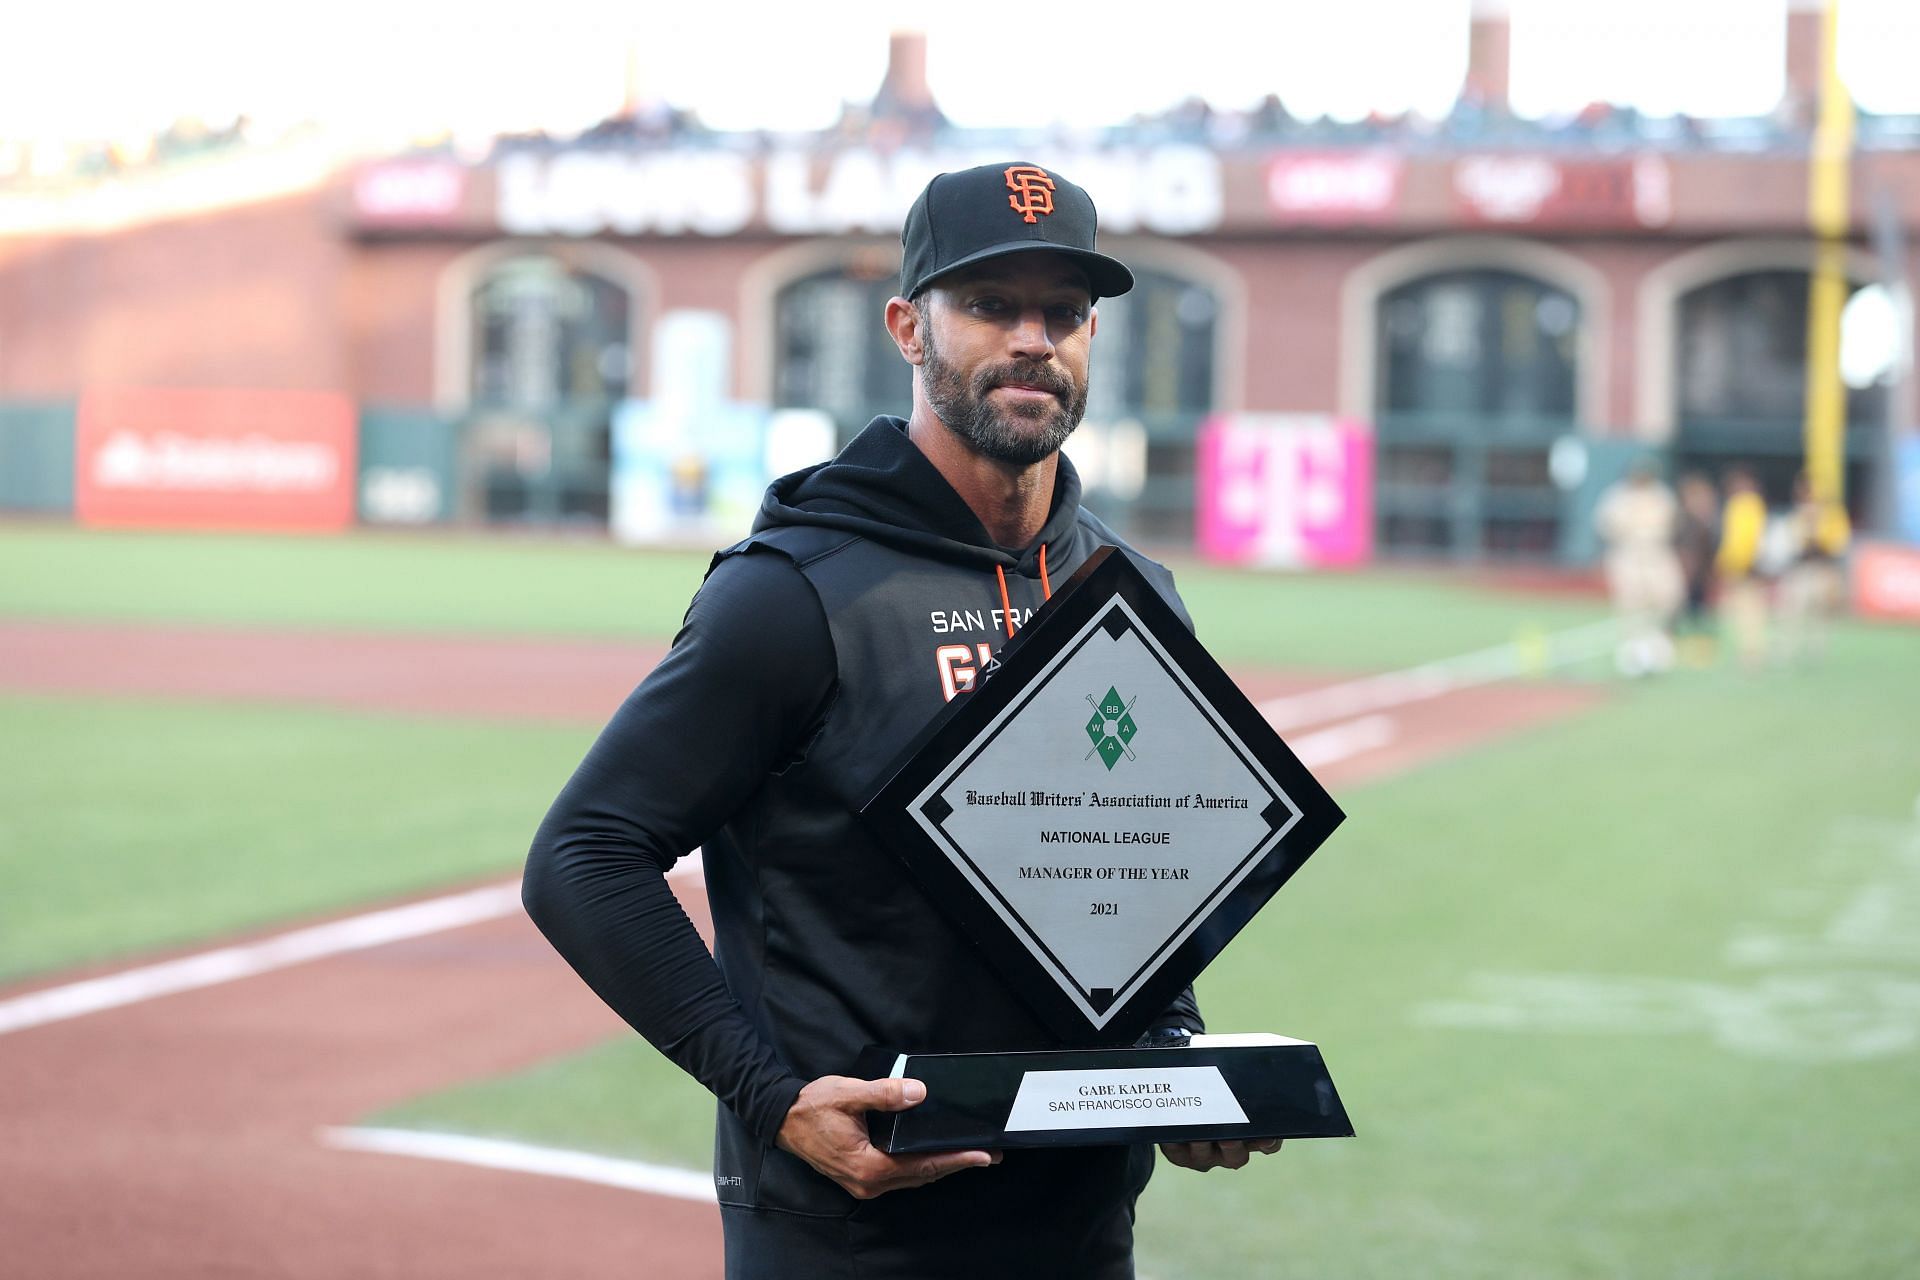 APRIL 11: Manager Gabe Kapler of the San Francisco Giants receives his award for being named the National League Manager of the Year